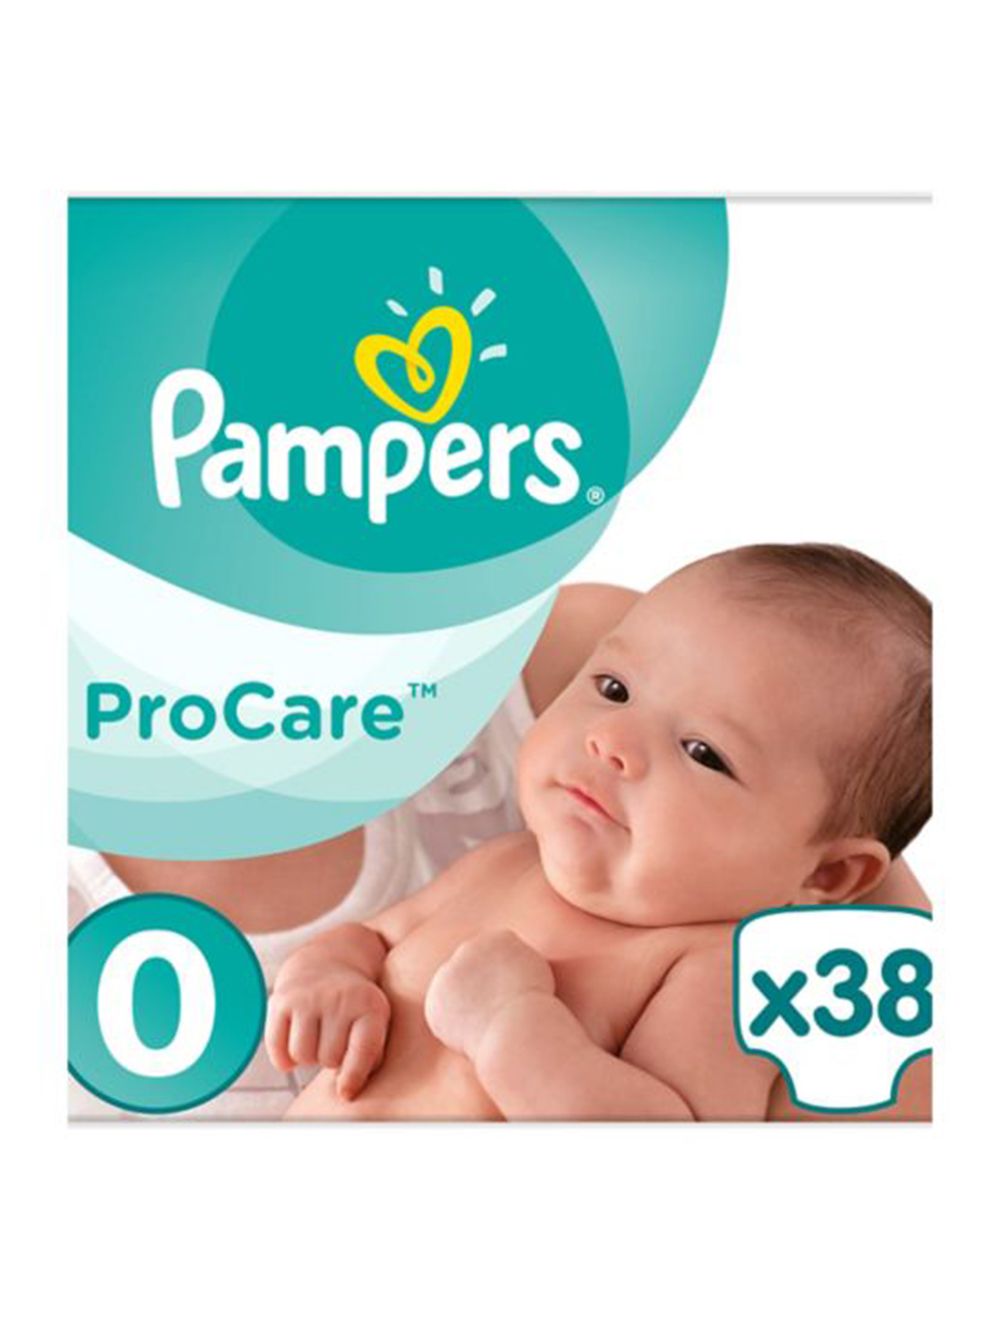 olx pampers moli care